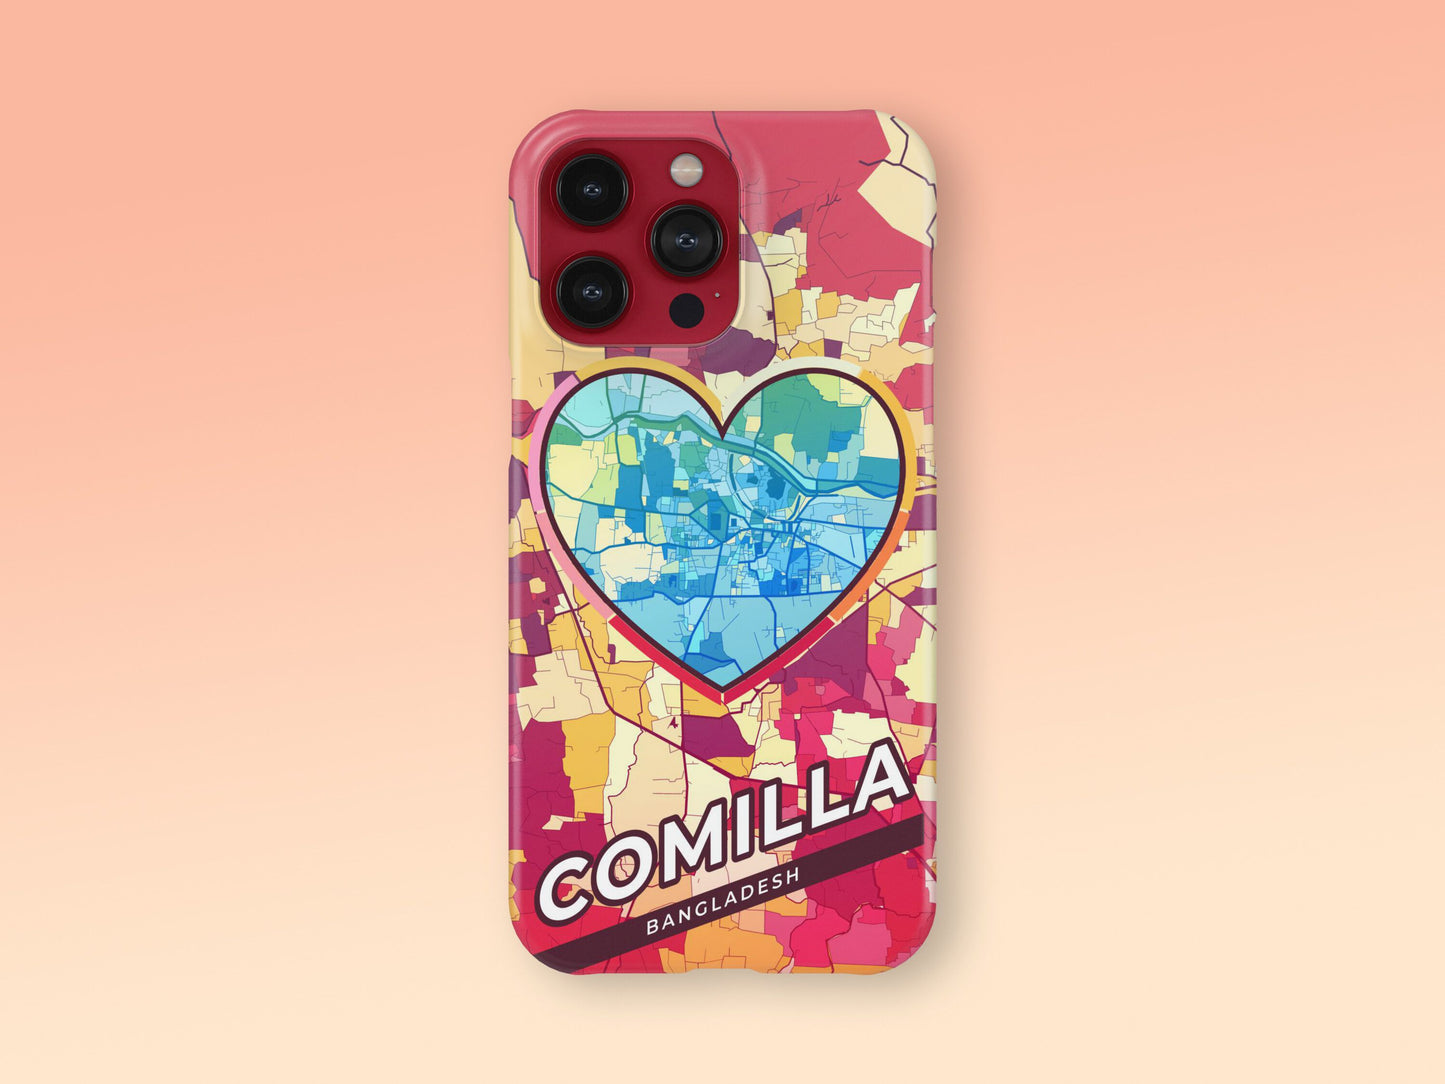 Comilla Bangladesh slim phone case with colorful icon. Birthday, wedding or housewarming gift. Couple match cases. 2